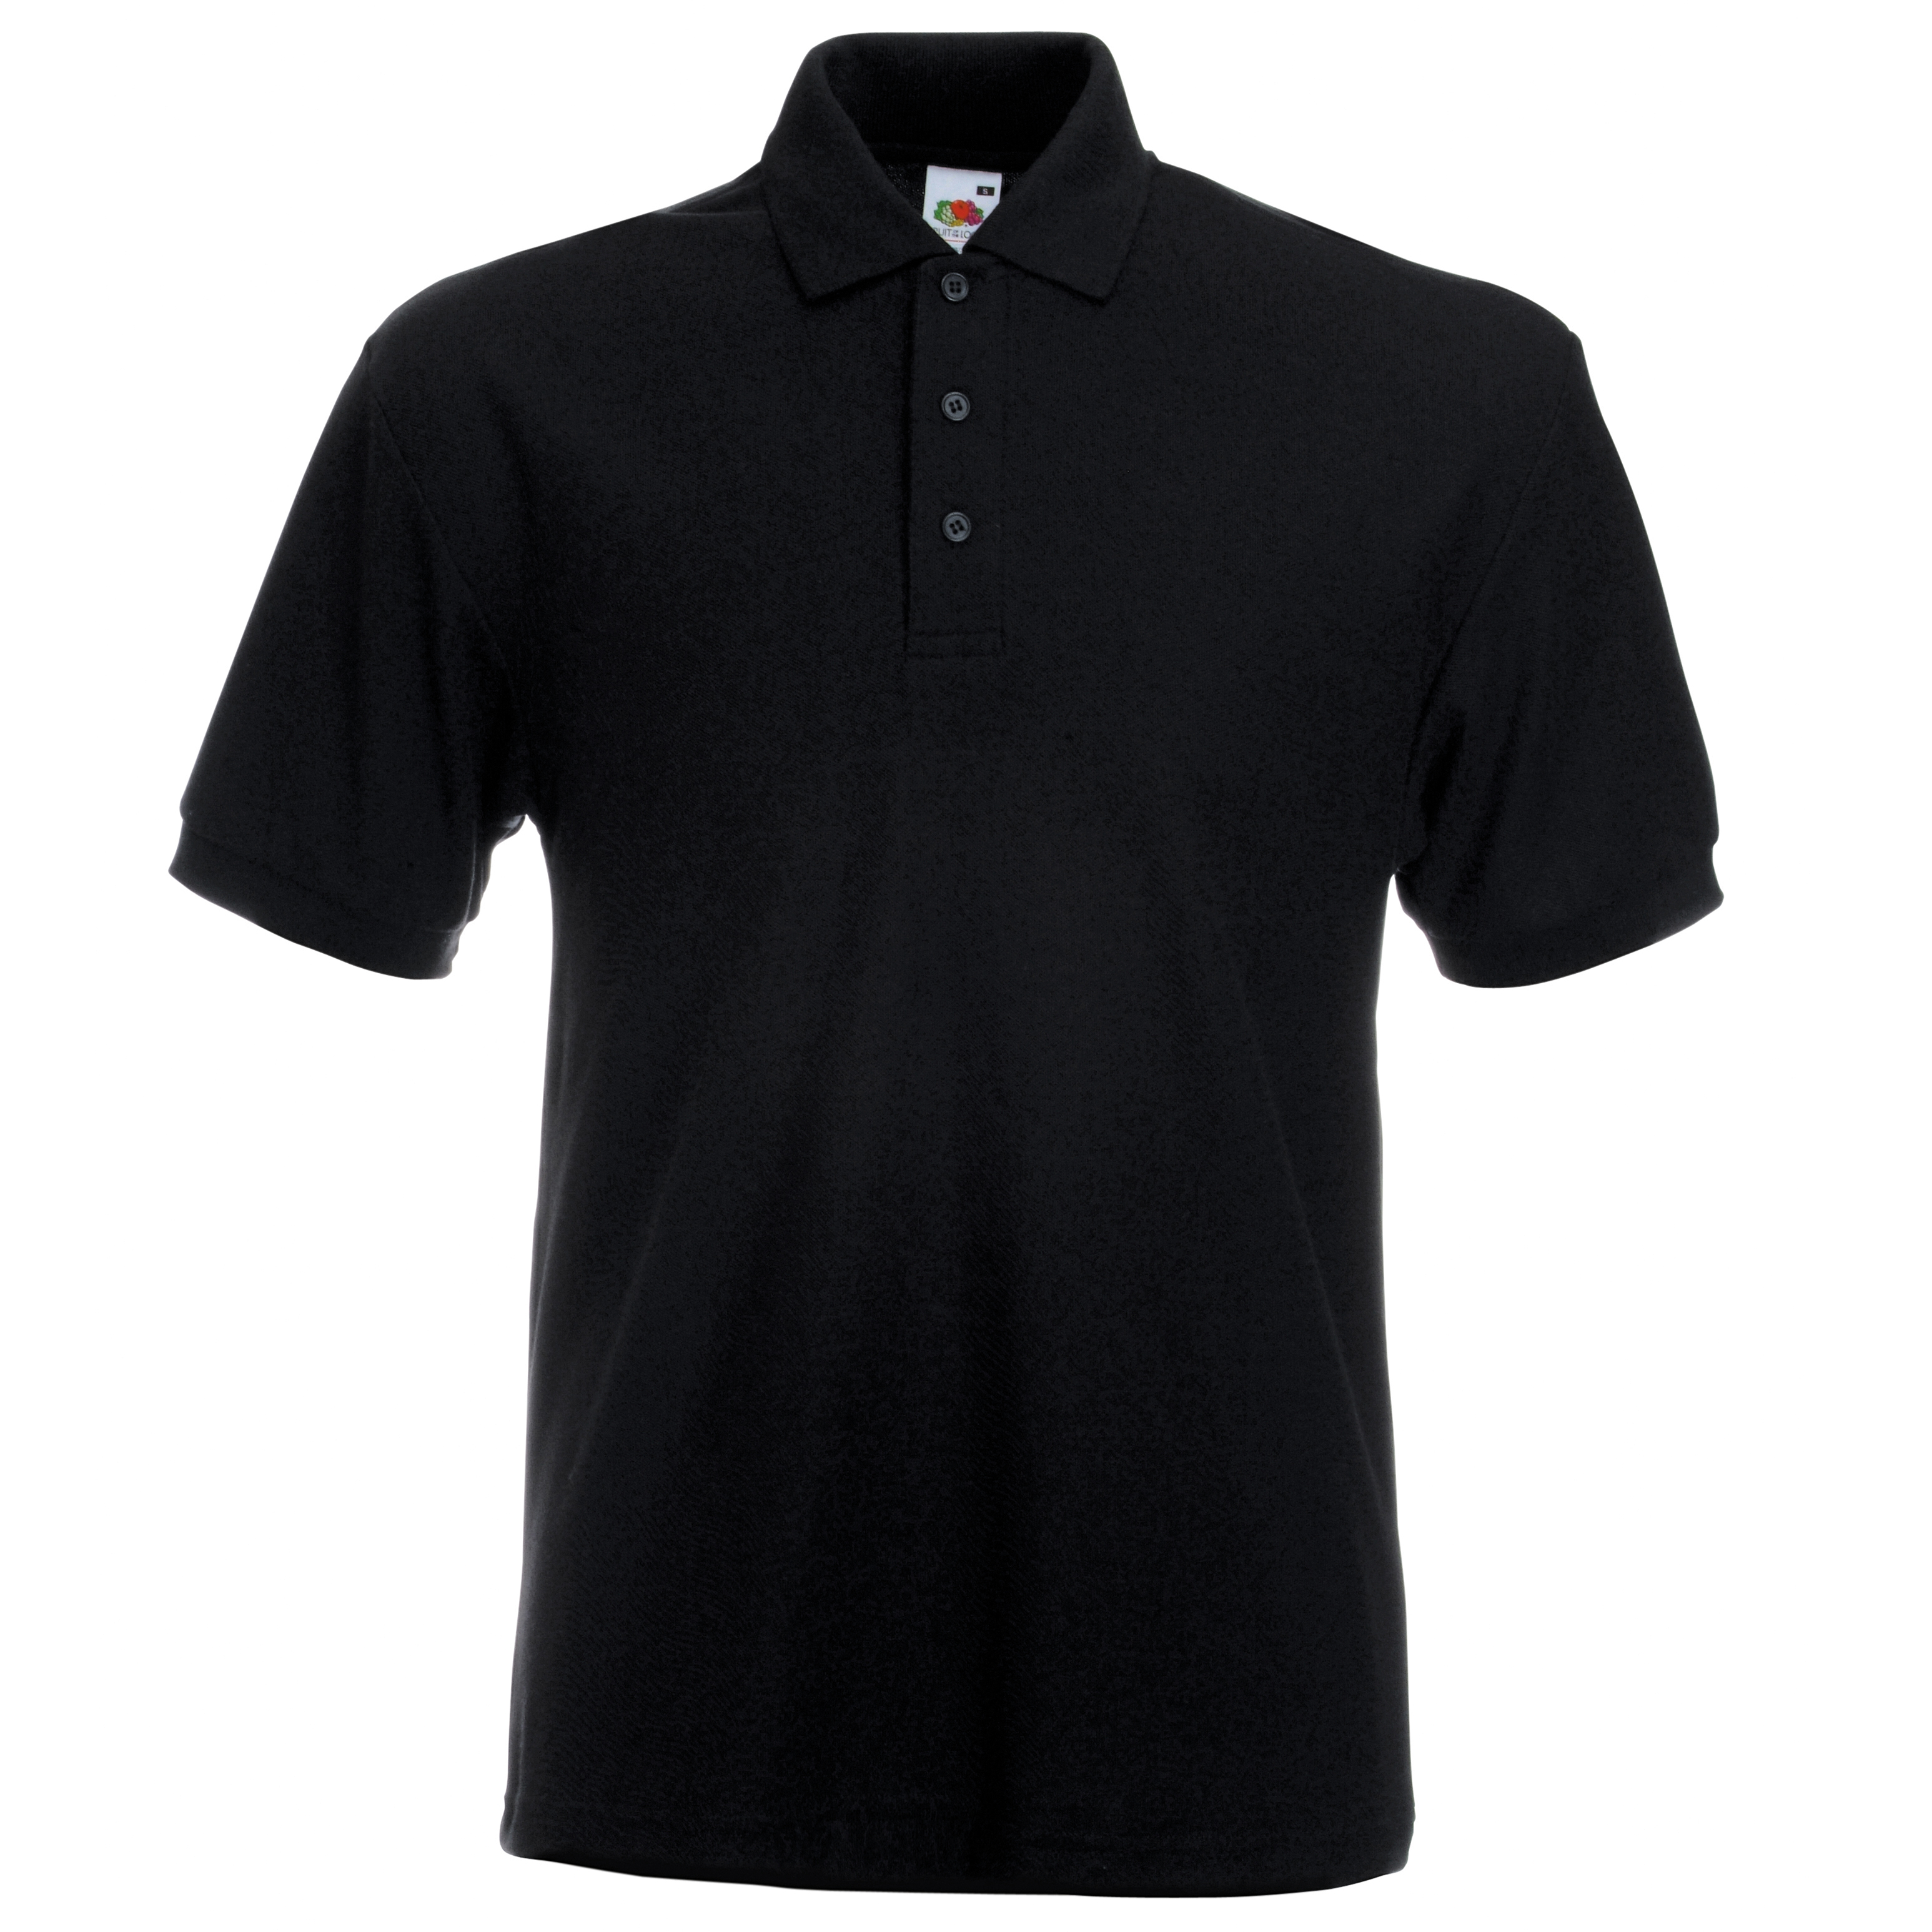 ax-httpswebsystems.s3.amazonaws.comtmp_for_downloadfruit-of-the-loom-heavyweight-65-35-polo-black.jpg